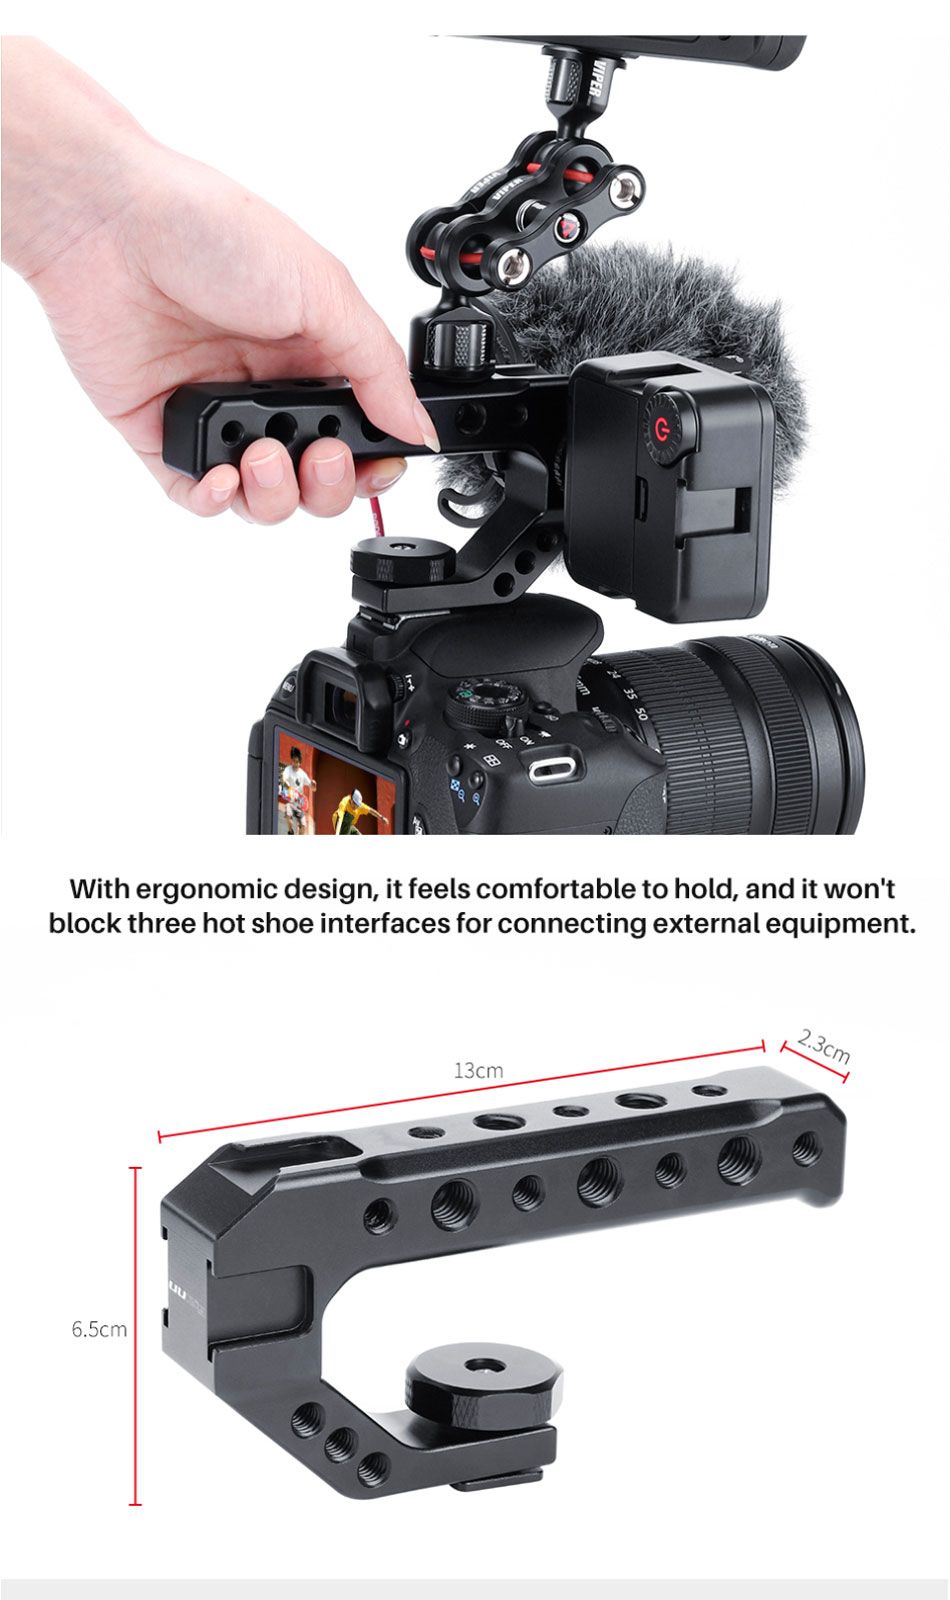 UURIG-R005-Handle-Grip-Cold-Shoe-Adapter-Mount-Universal-Handgrip-Stabilizer-for-Canon-for-Nikon-DLS-1567930